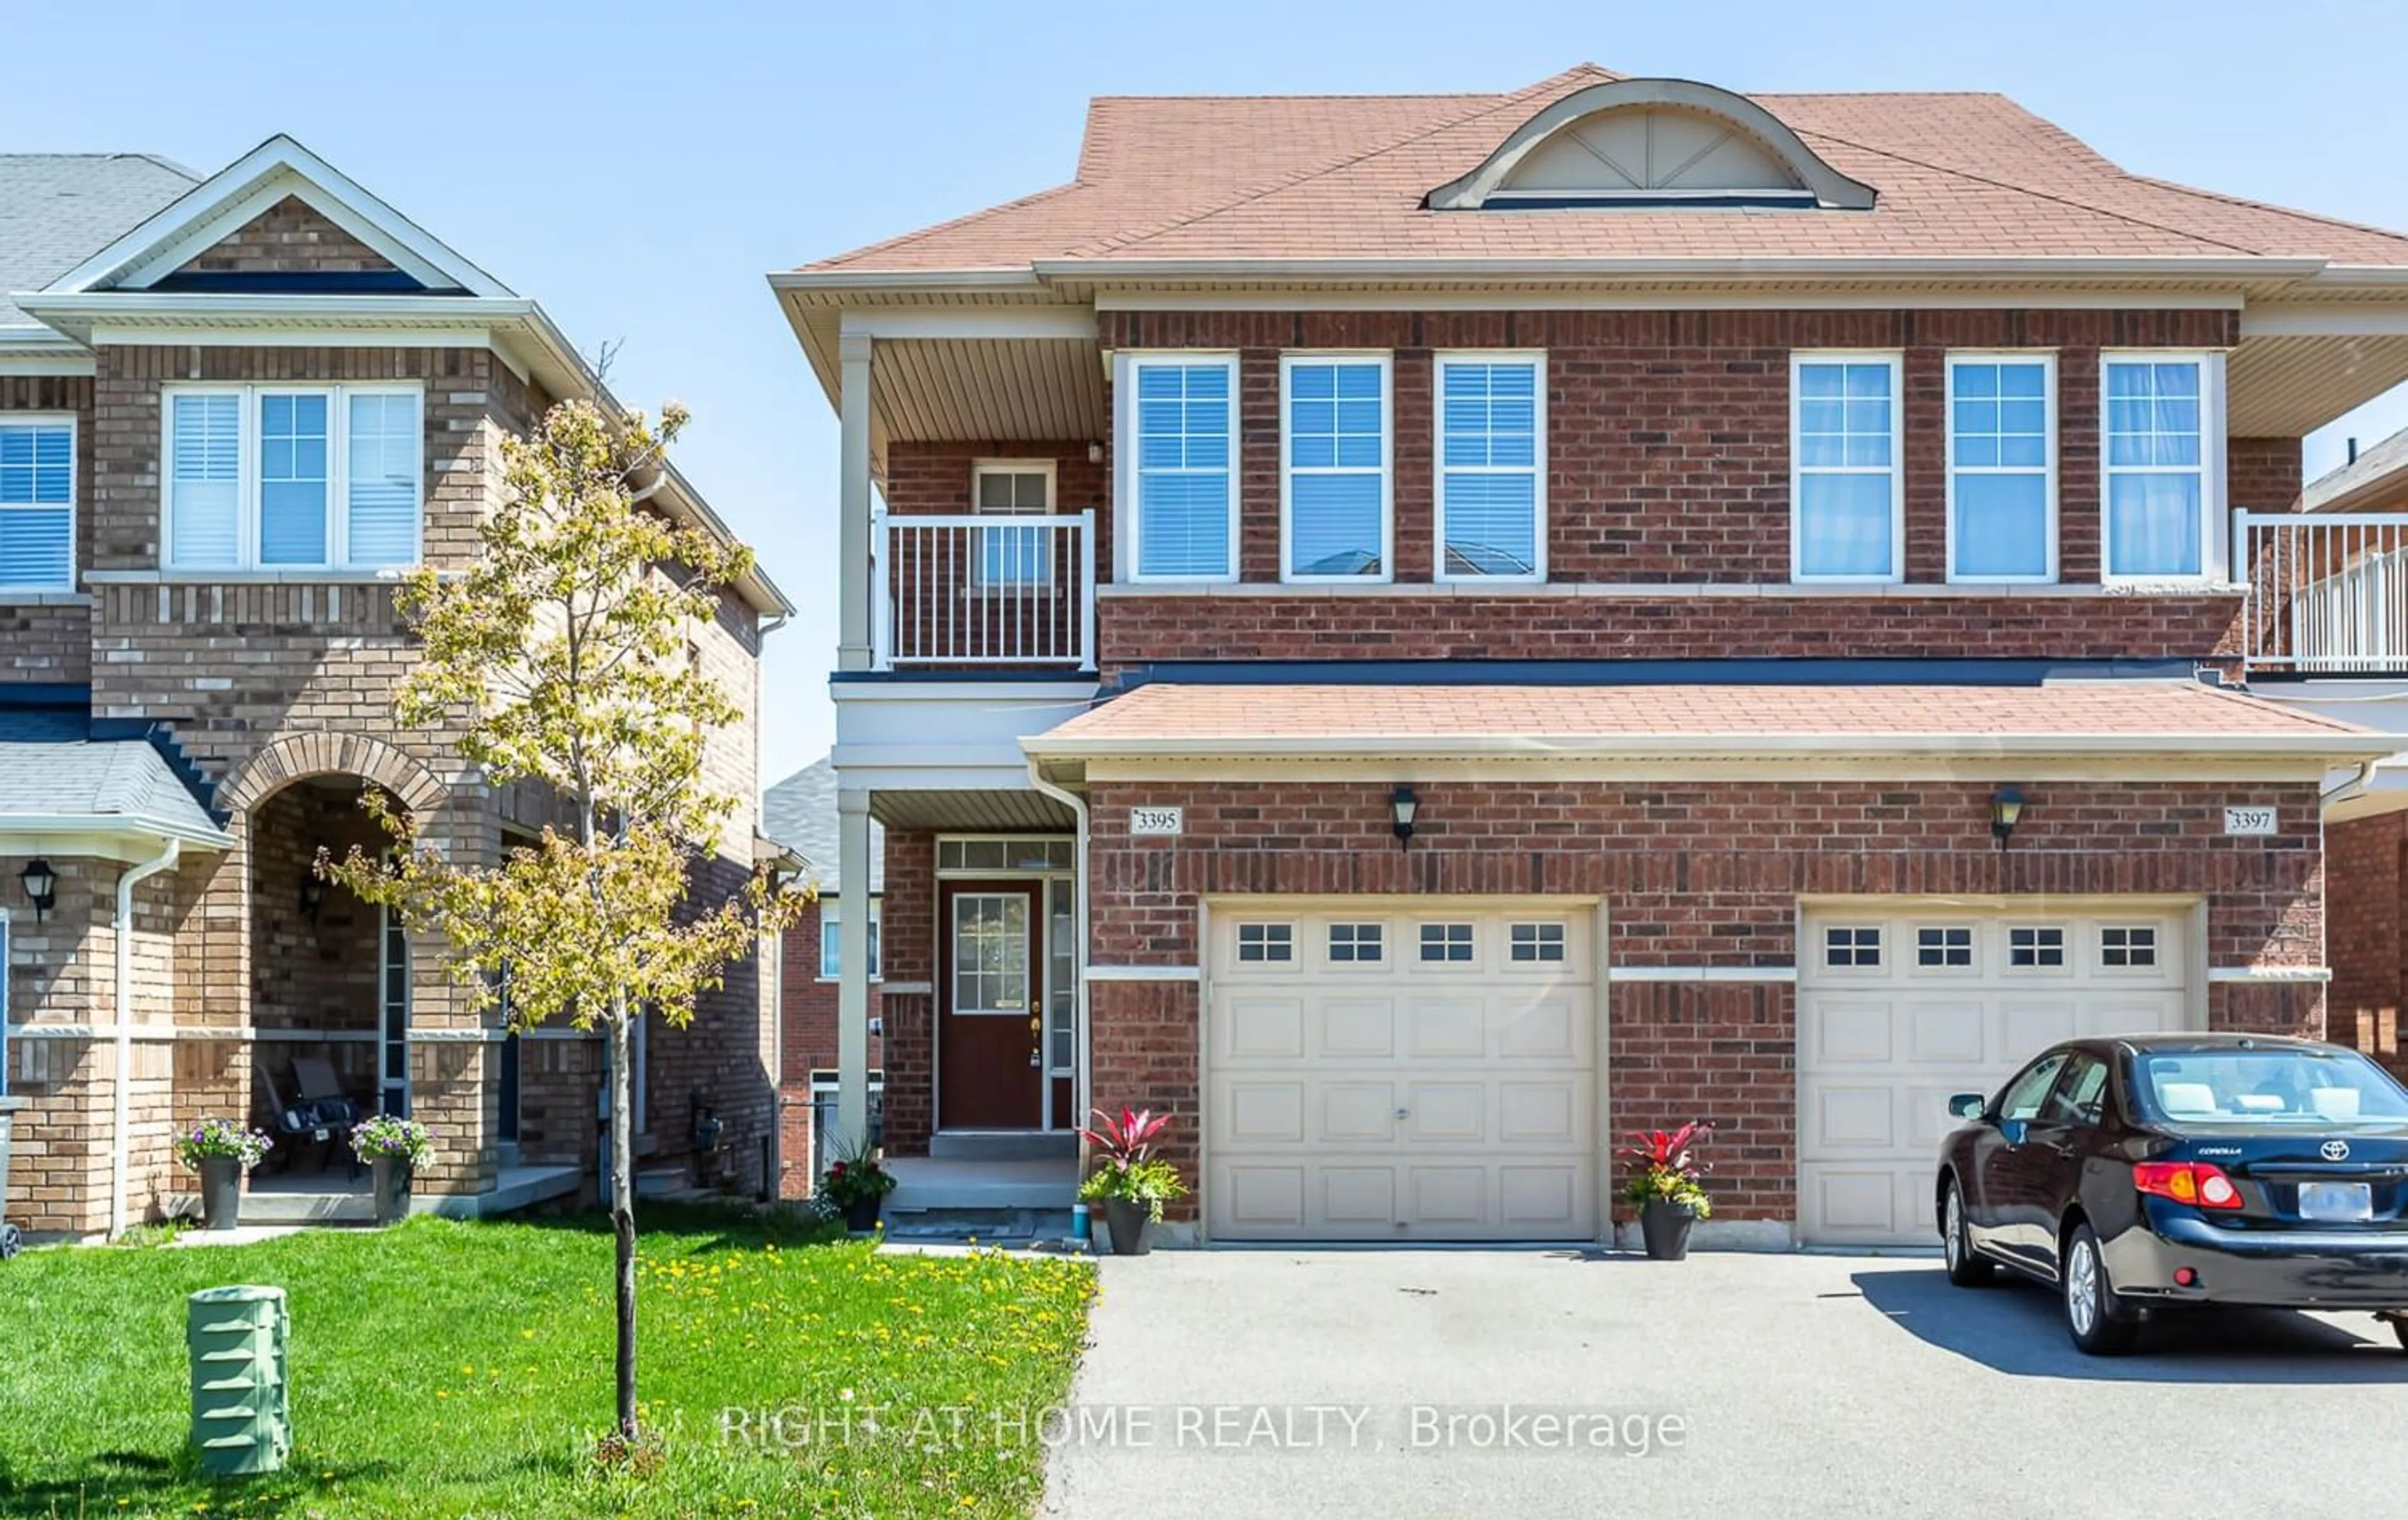 Home with brick exterior material for 3395 Stoney Cres, Mississauga Ontario L5M 0N7